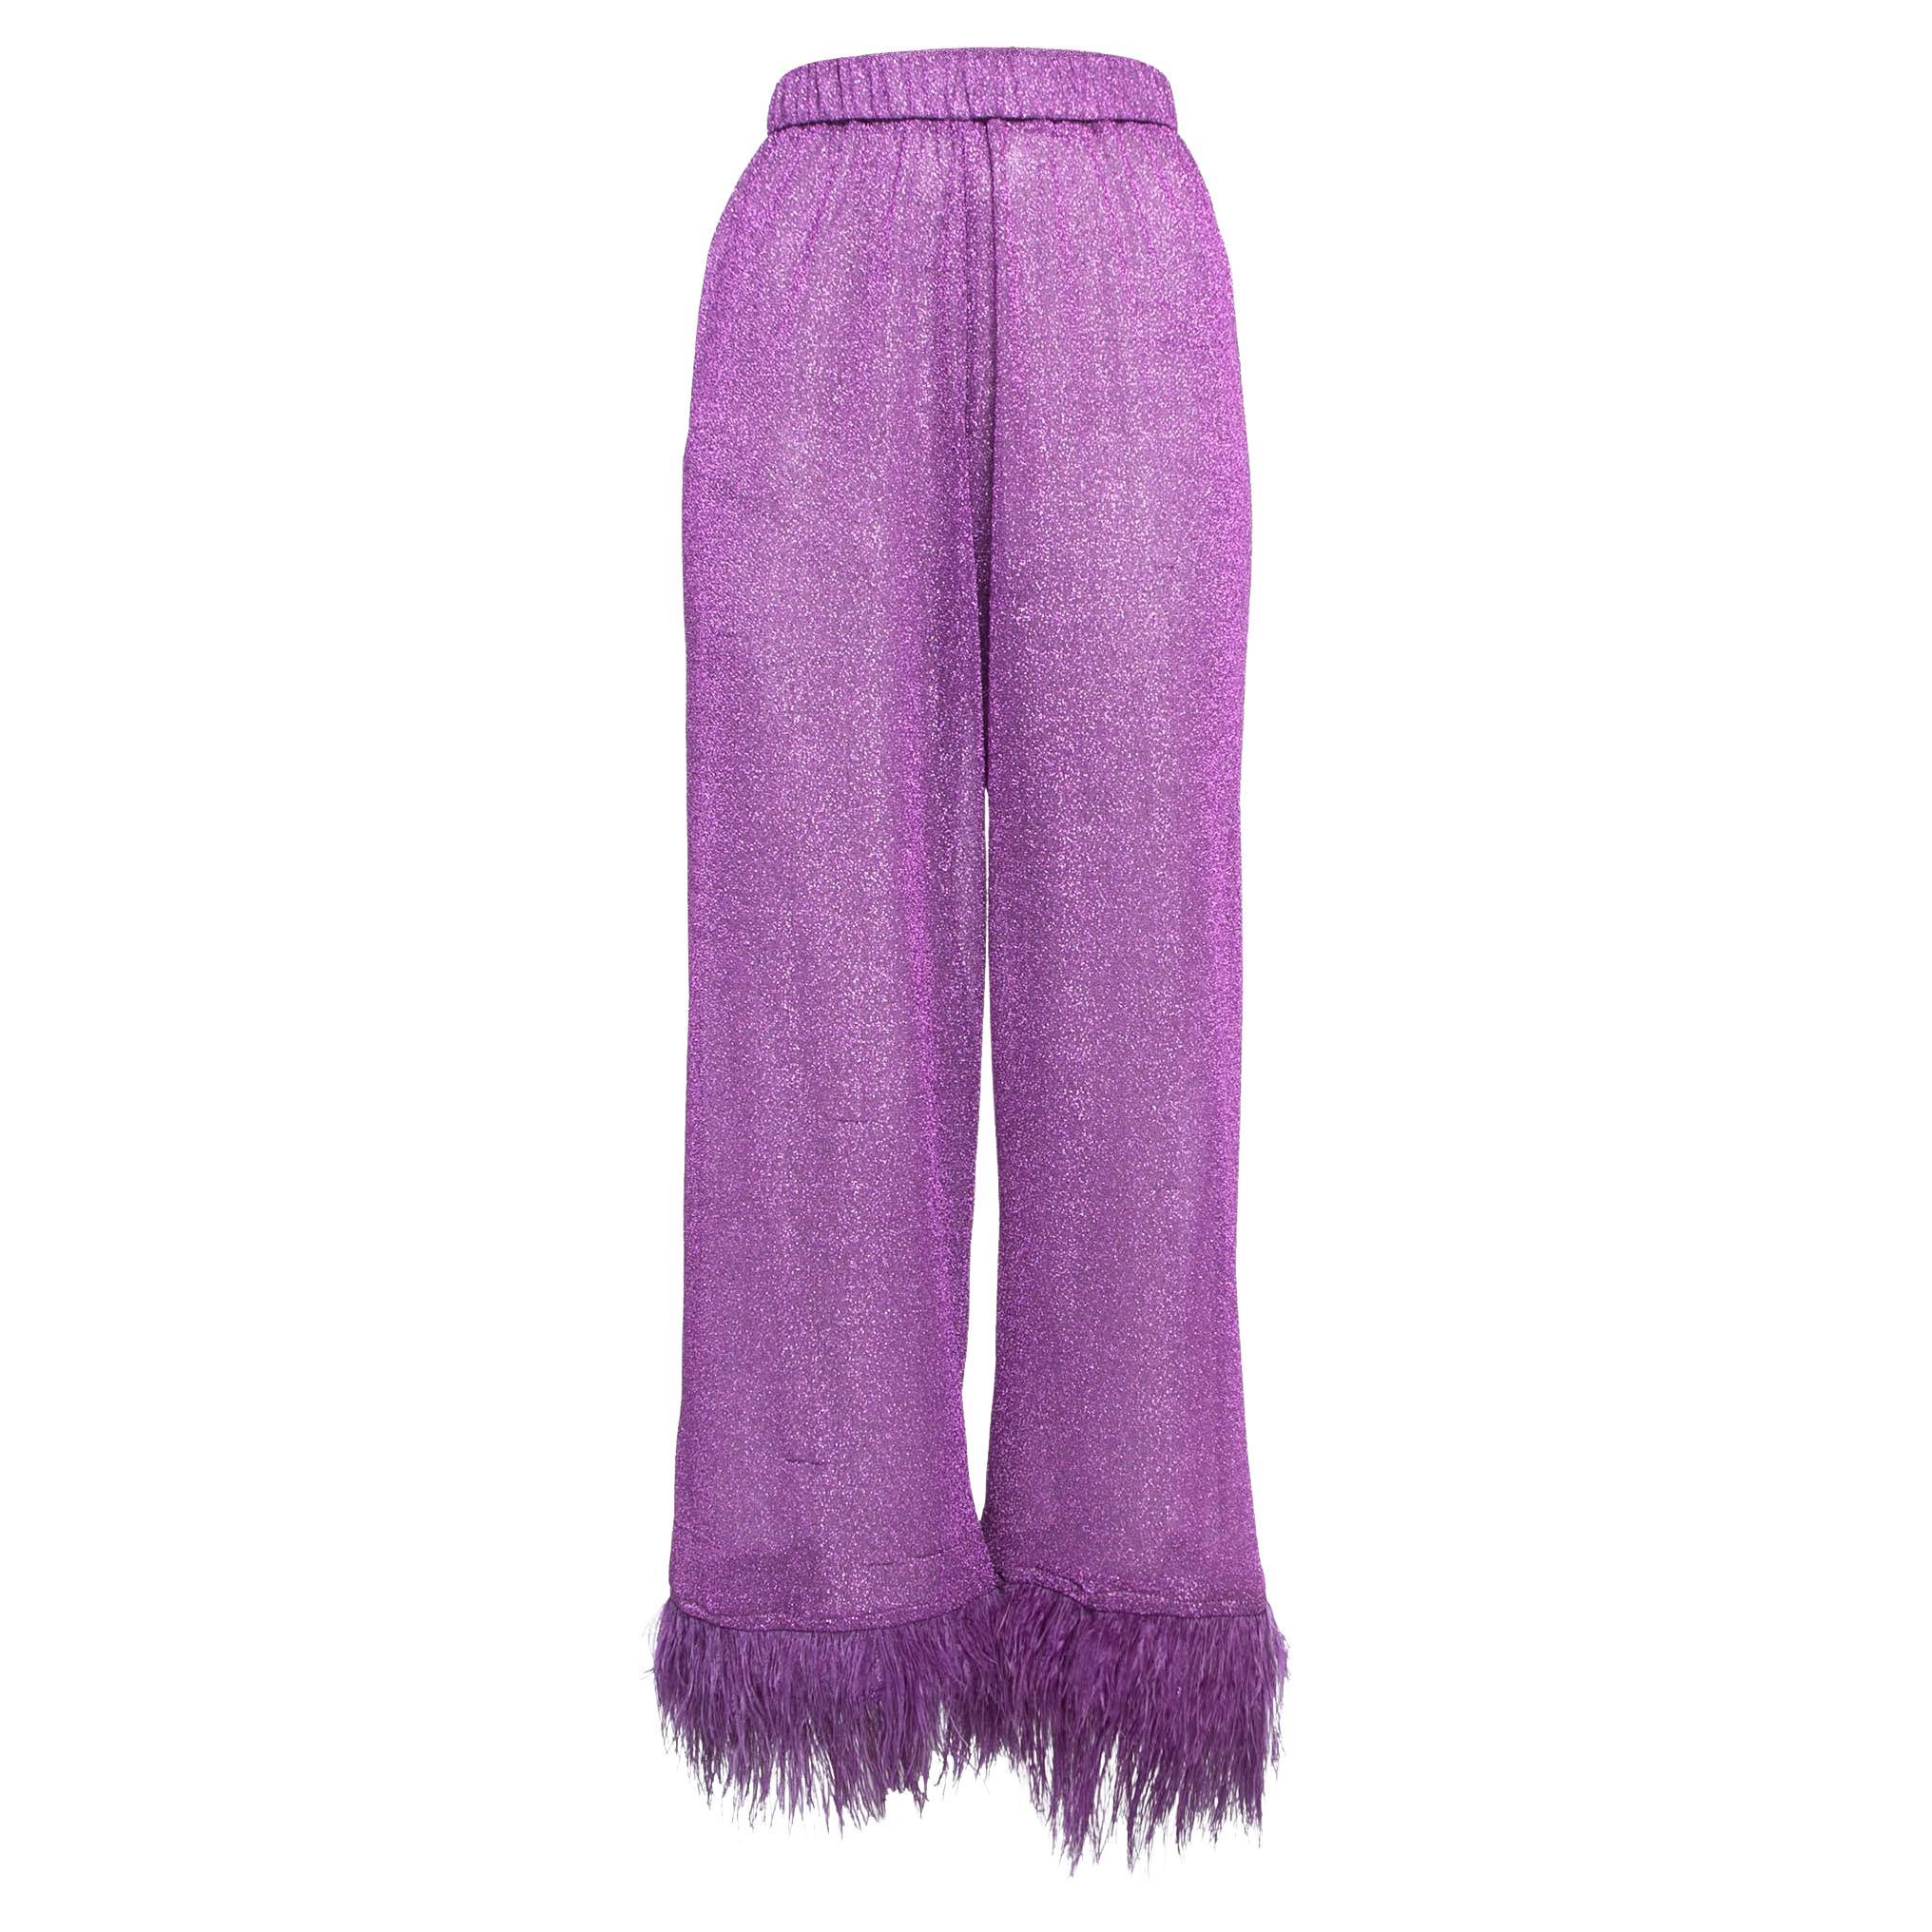 Oseree Purple Lurex Knit Feather Trim Sheer Trousers S For Sale